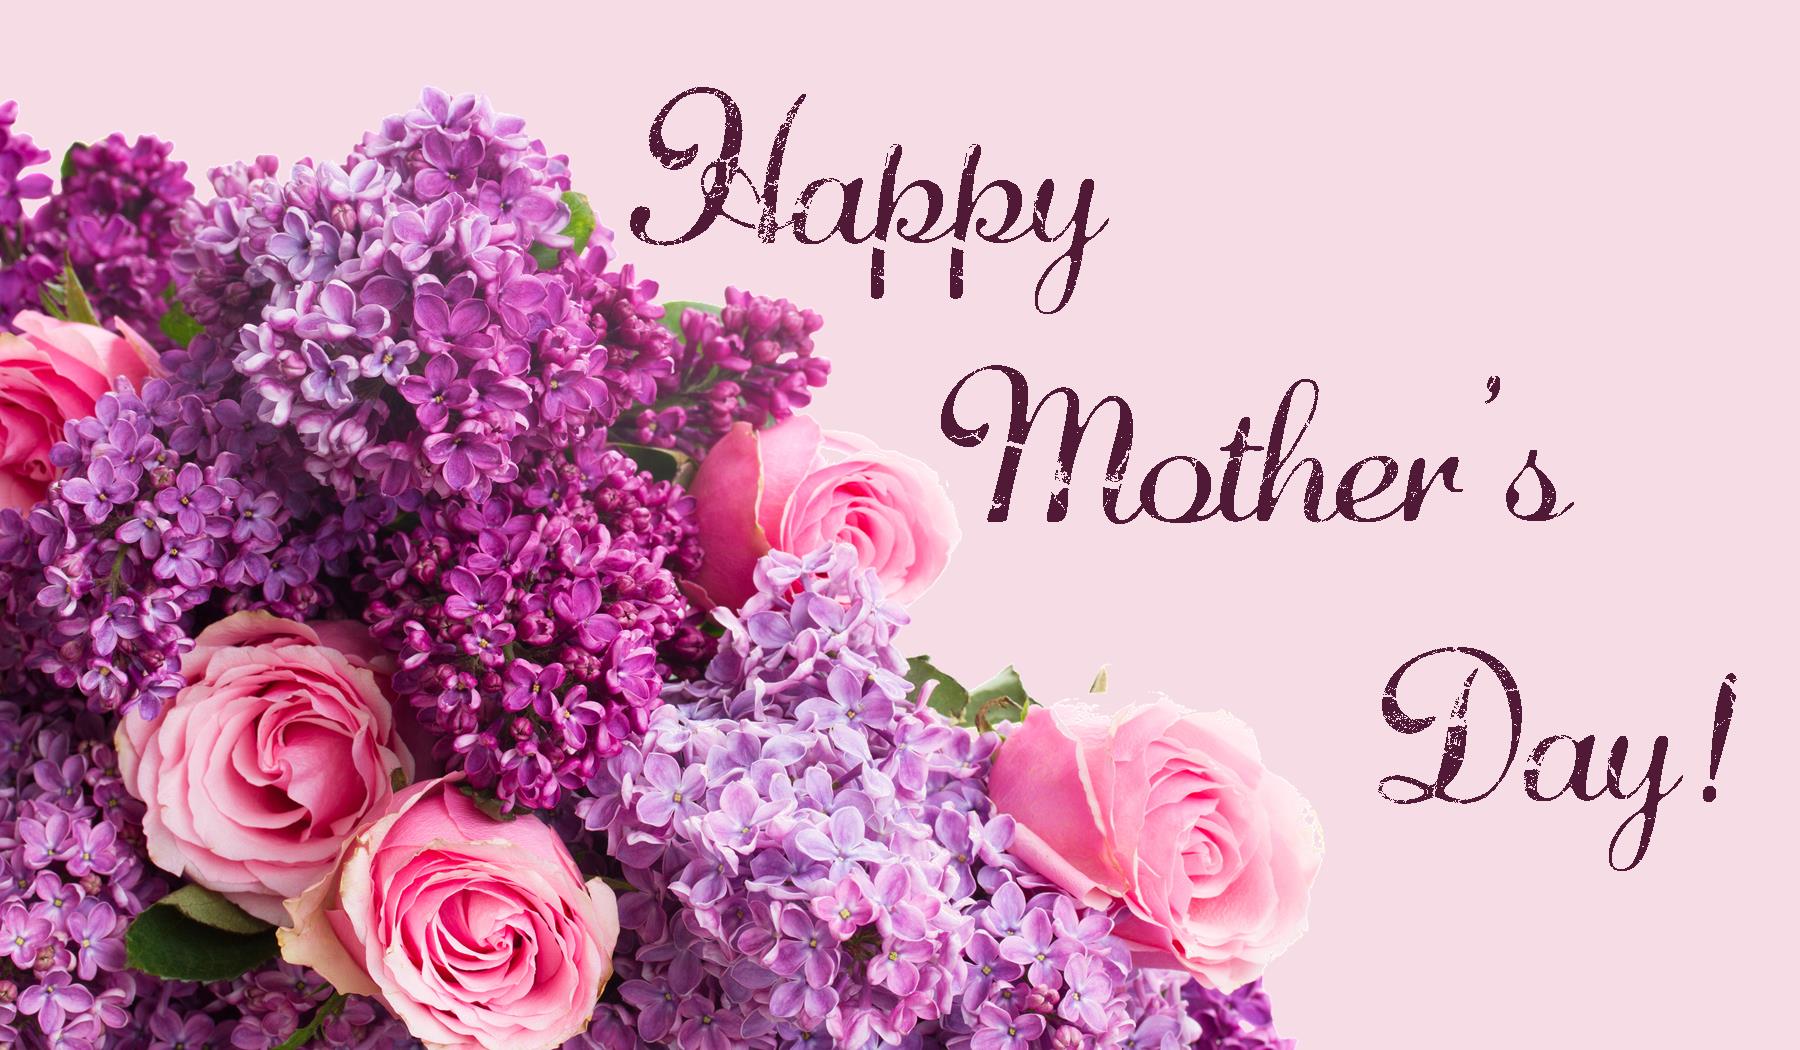 Happy Mothers Day Images Hd - HD Wallpaper 